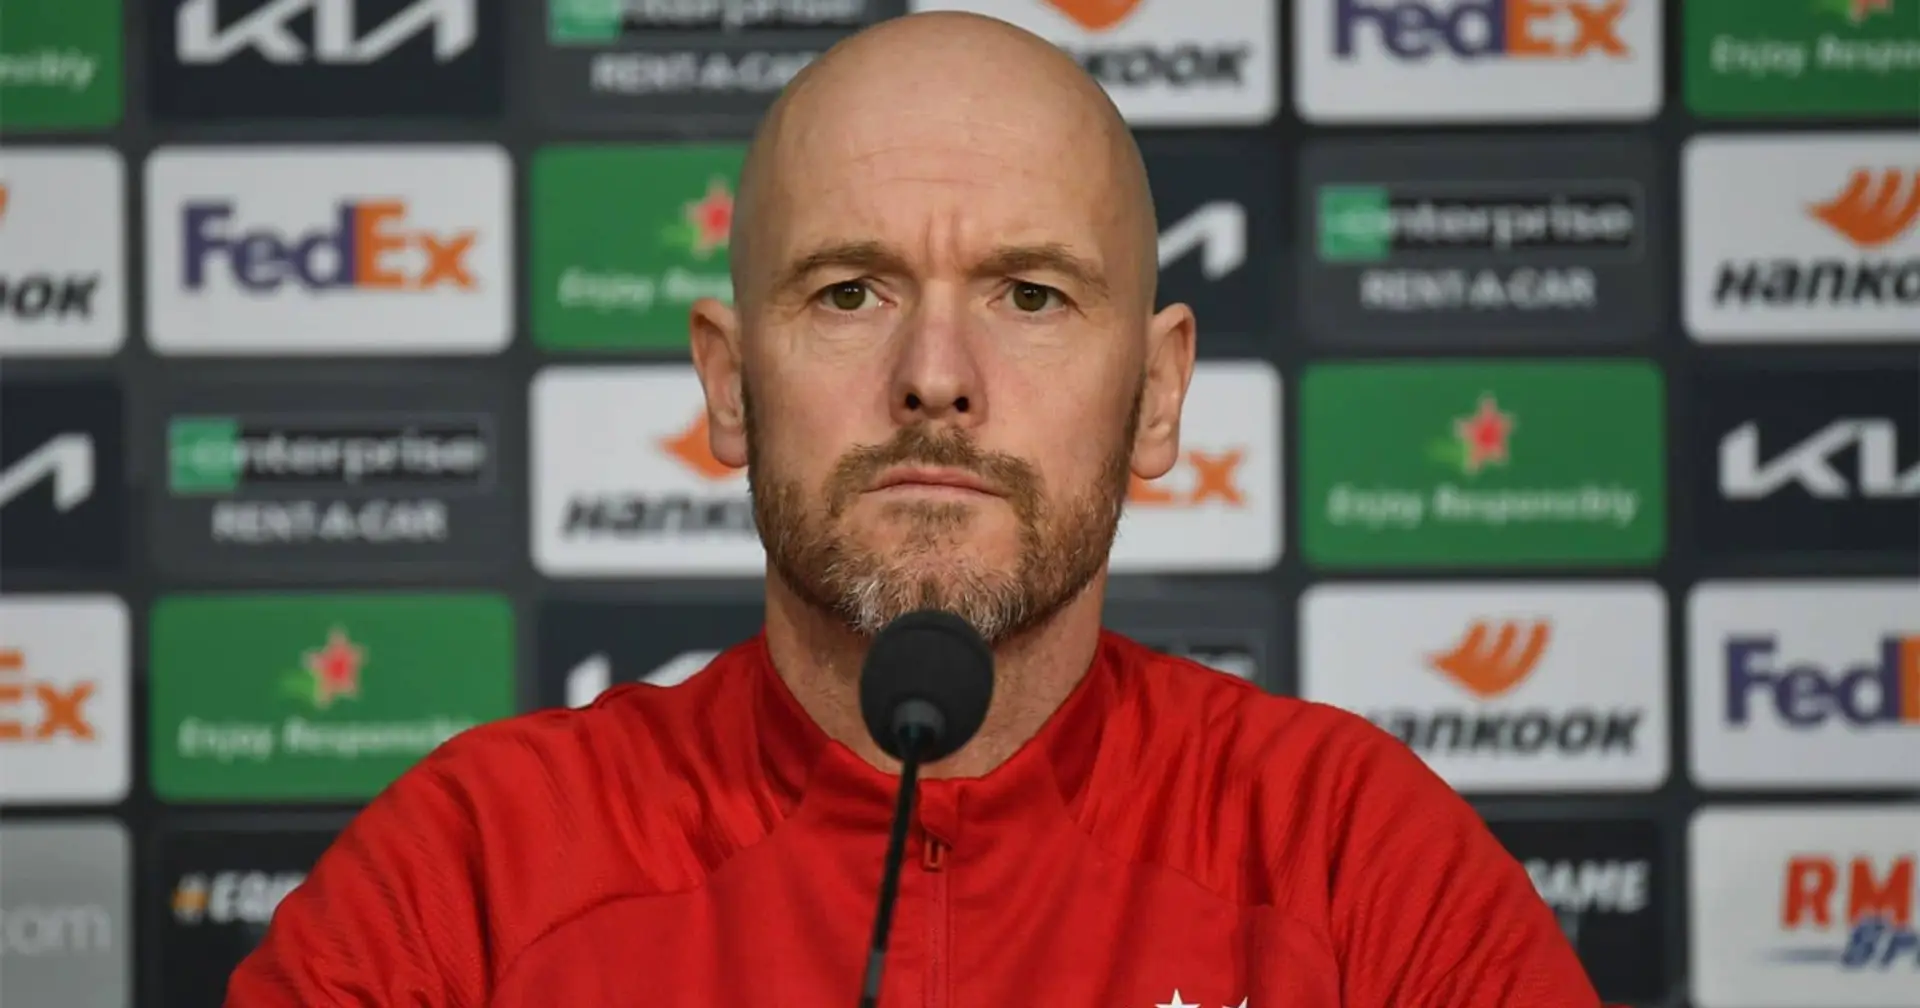 Erik ten Hag sets one key condition for him to accept Man United job - multiple sources